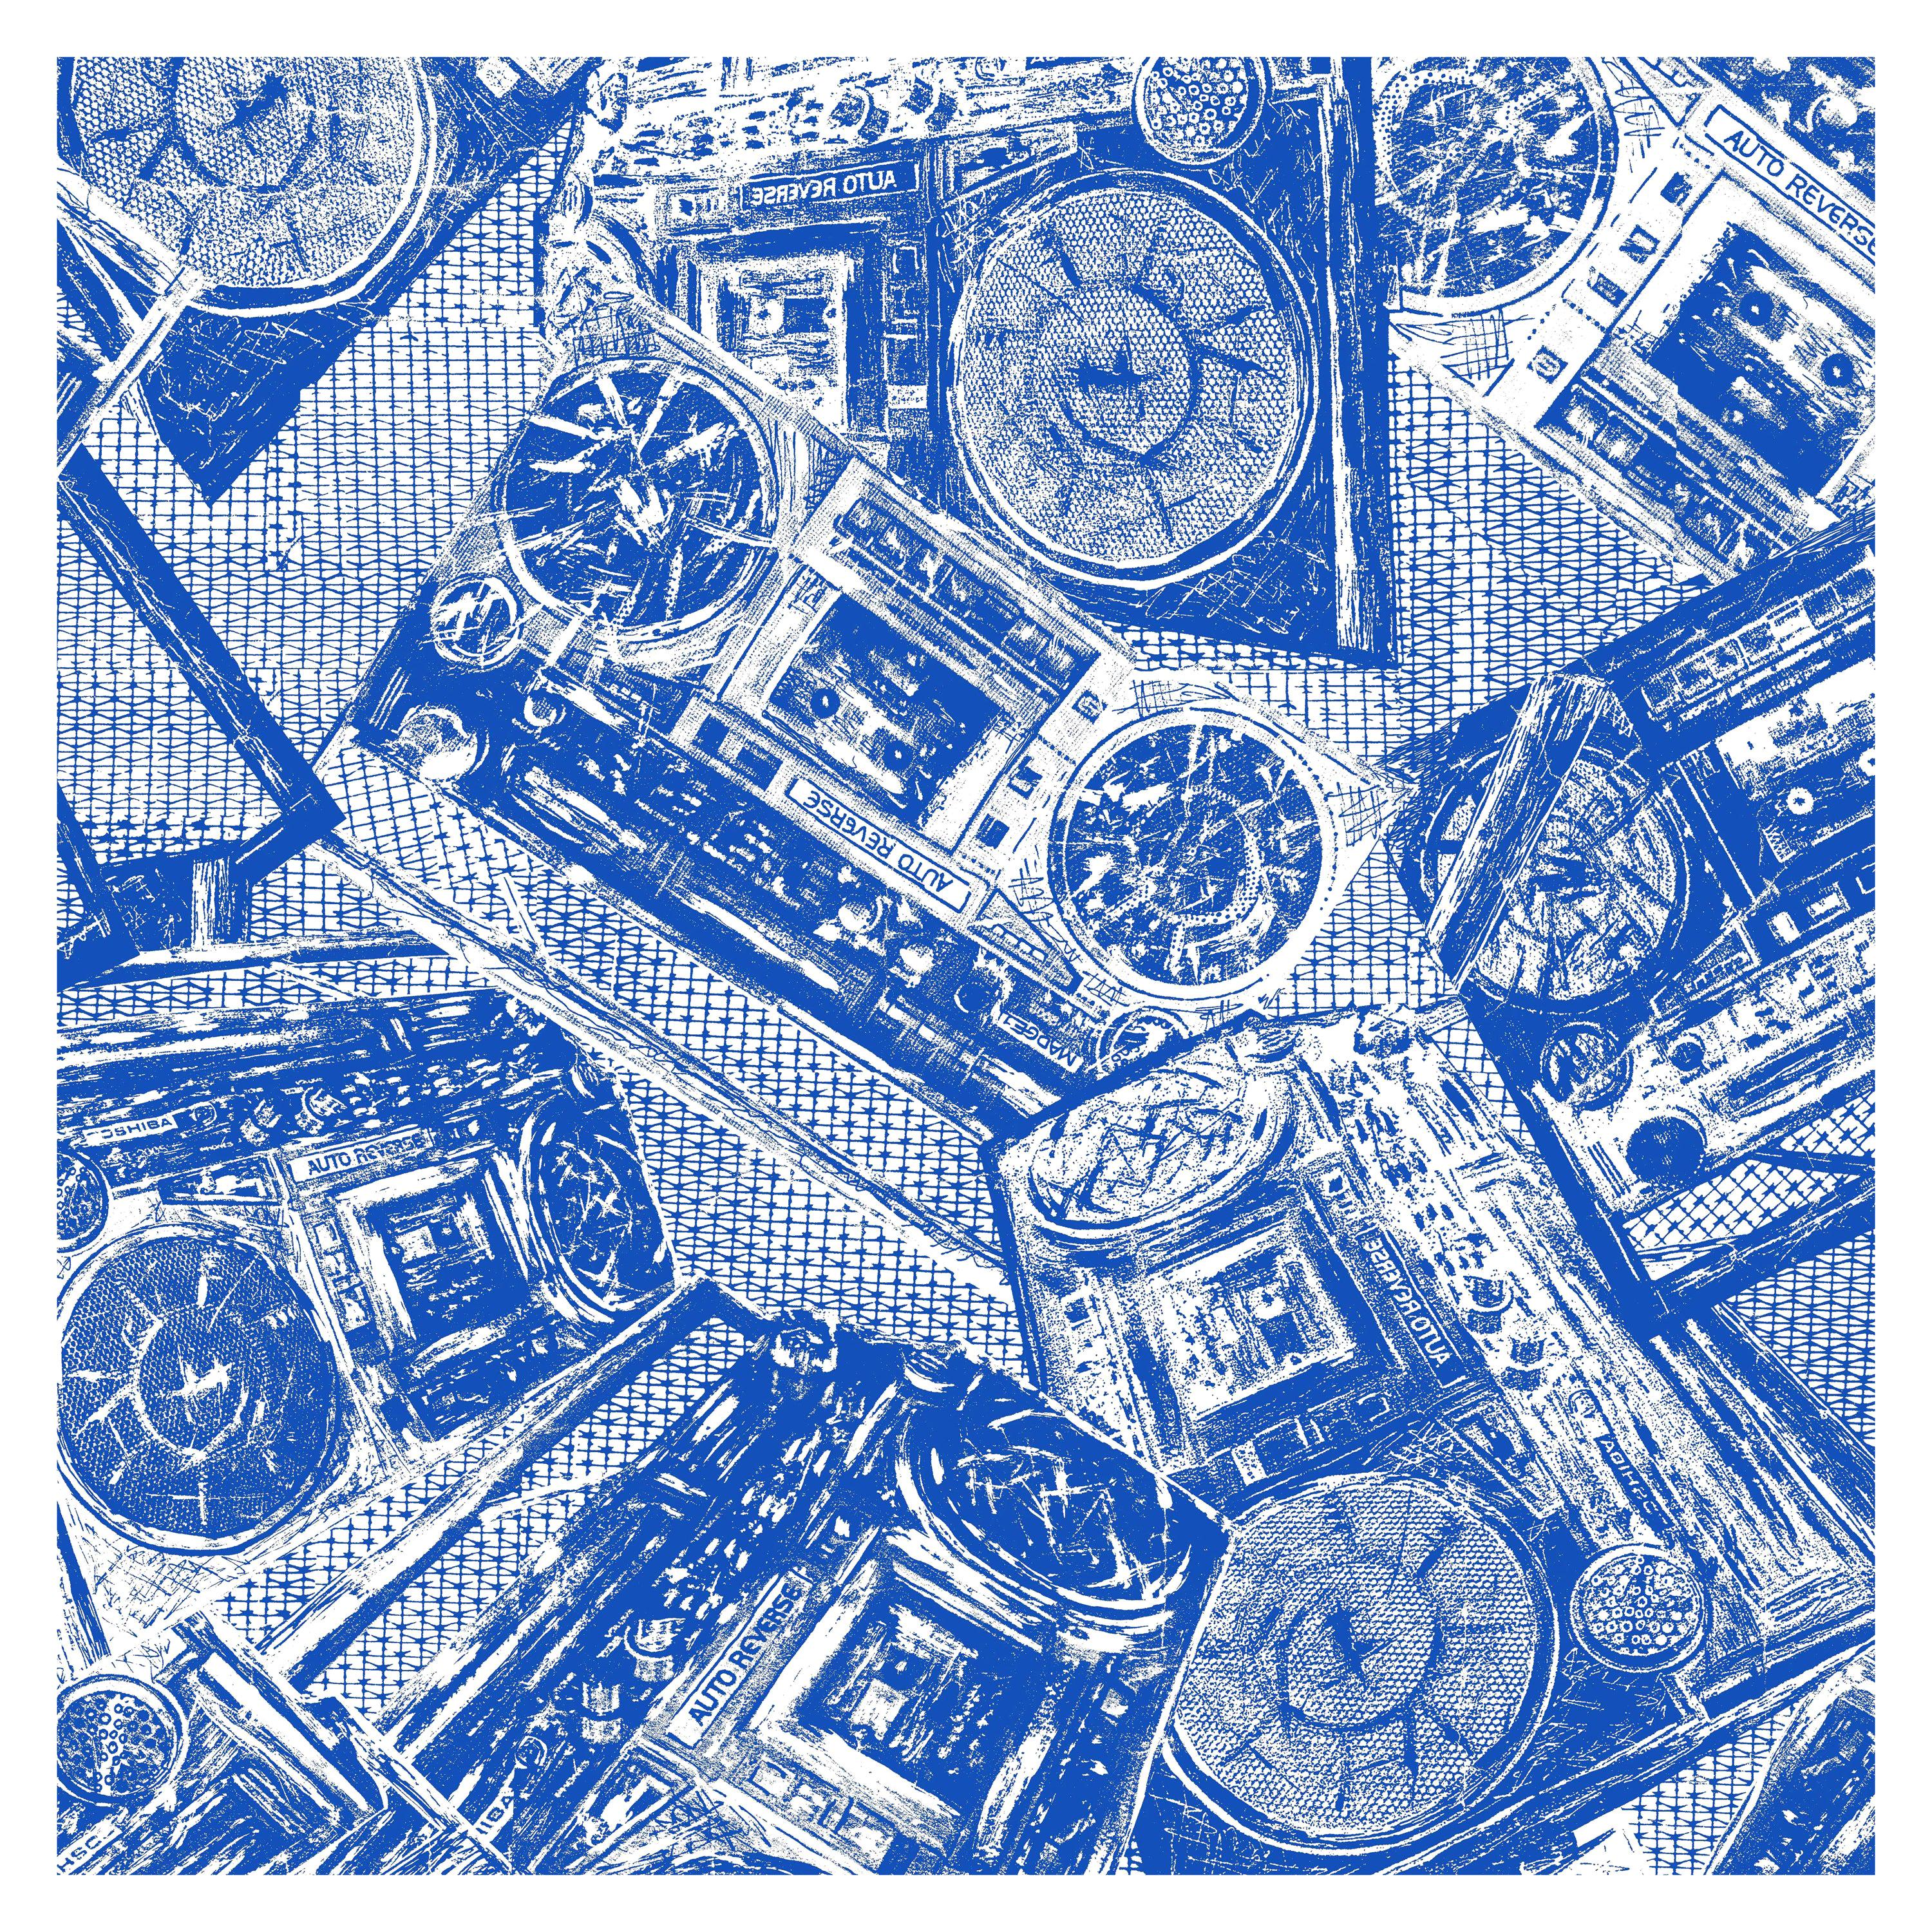 Boom Box, China Blue Colorway, on Smooth Wallpaper For Sale